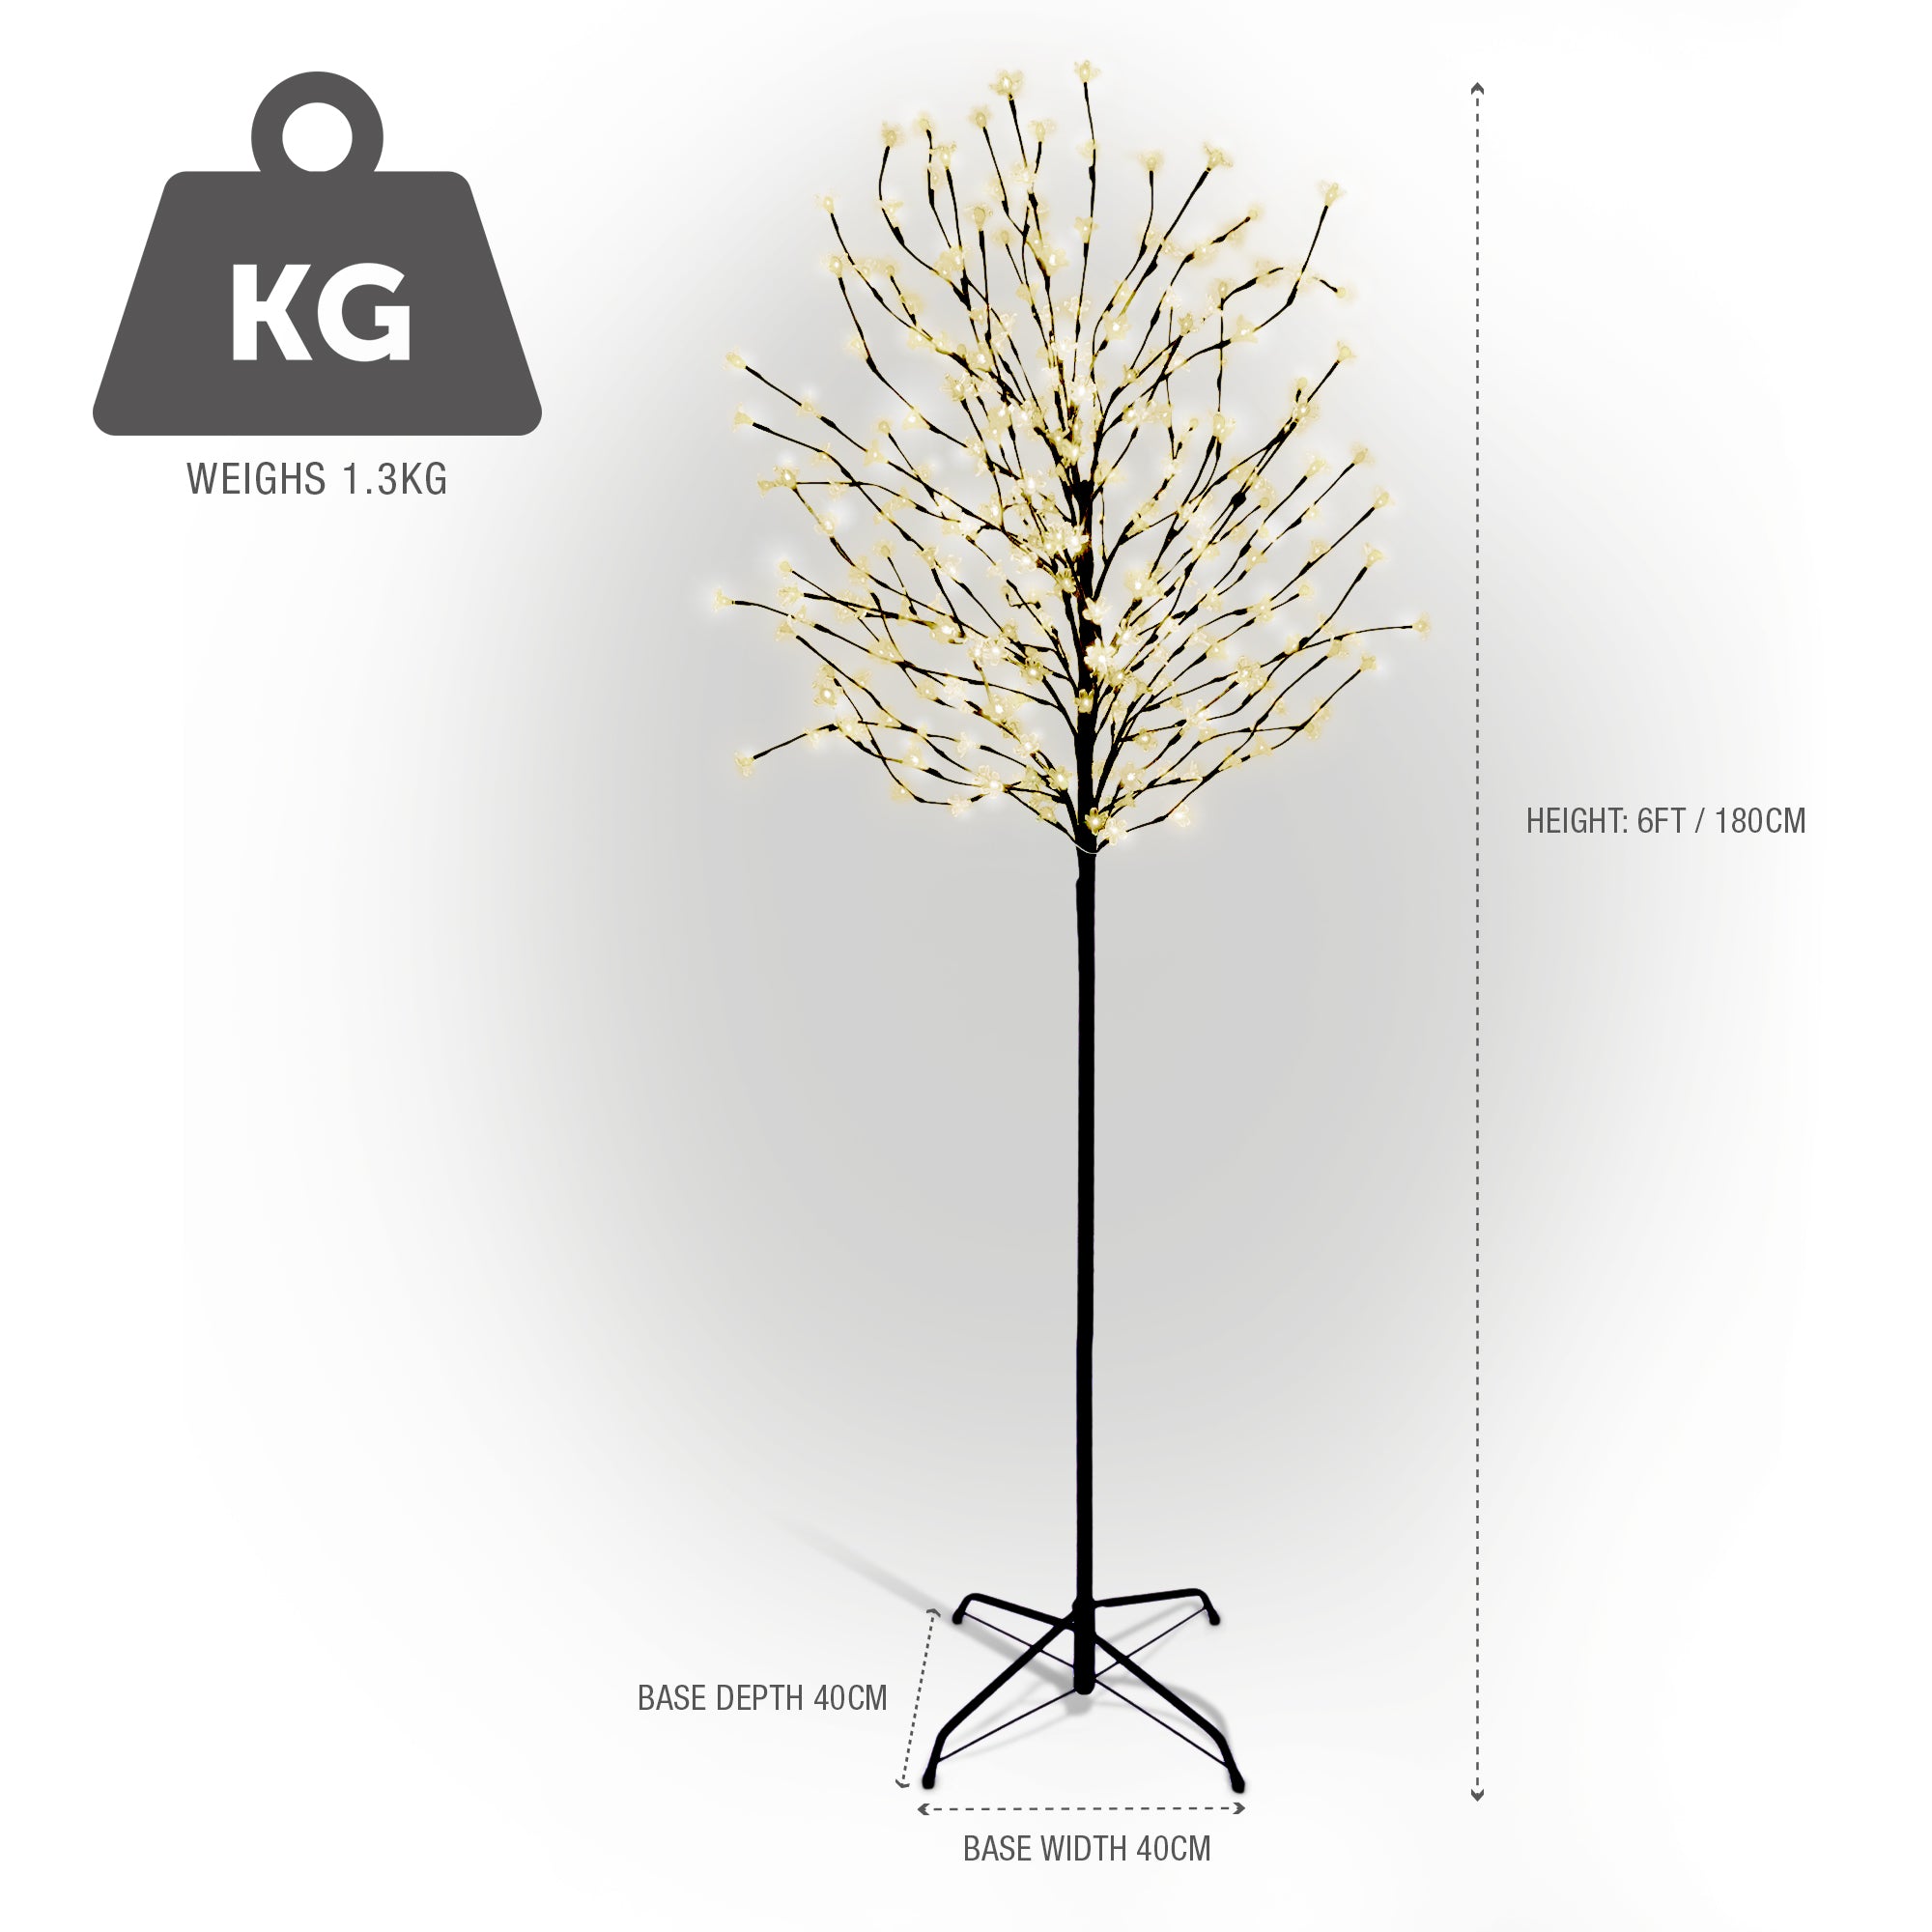 NETTA 6FT LED Cherry Blossom Tree, Pre-Lit 300 Lights, Auto-Off Timer and 8 Lighting Modes, 3M Power Cable, Suitable for Indoor and Outdoor Use - Warm White